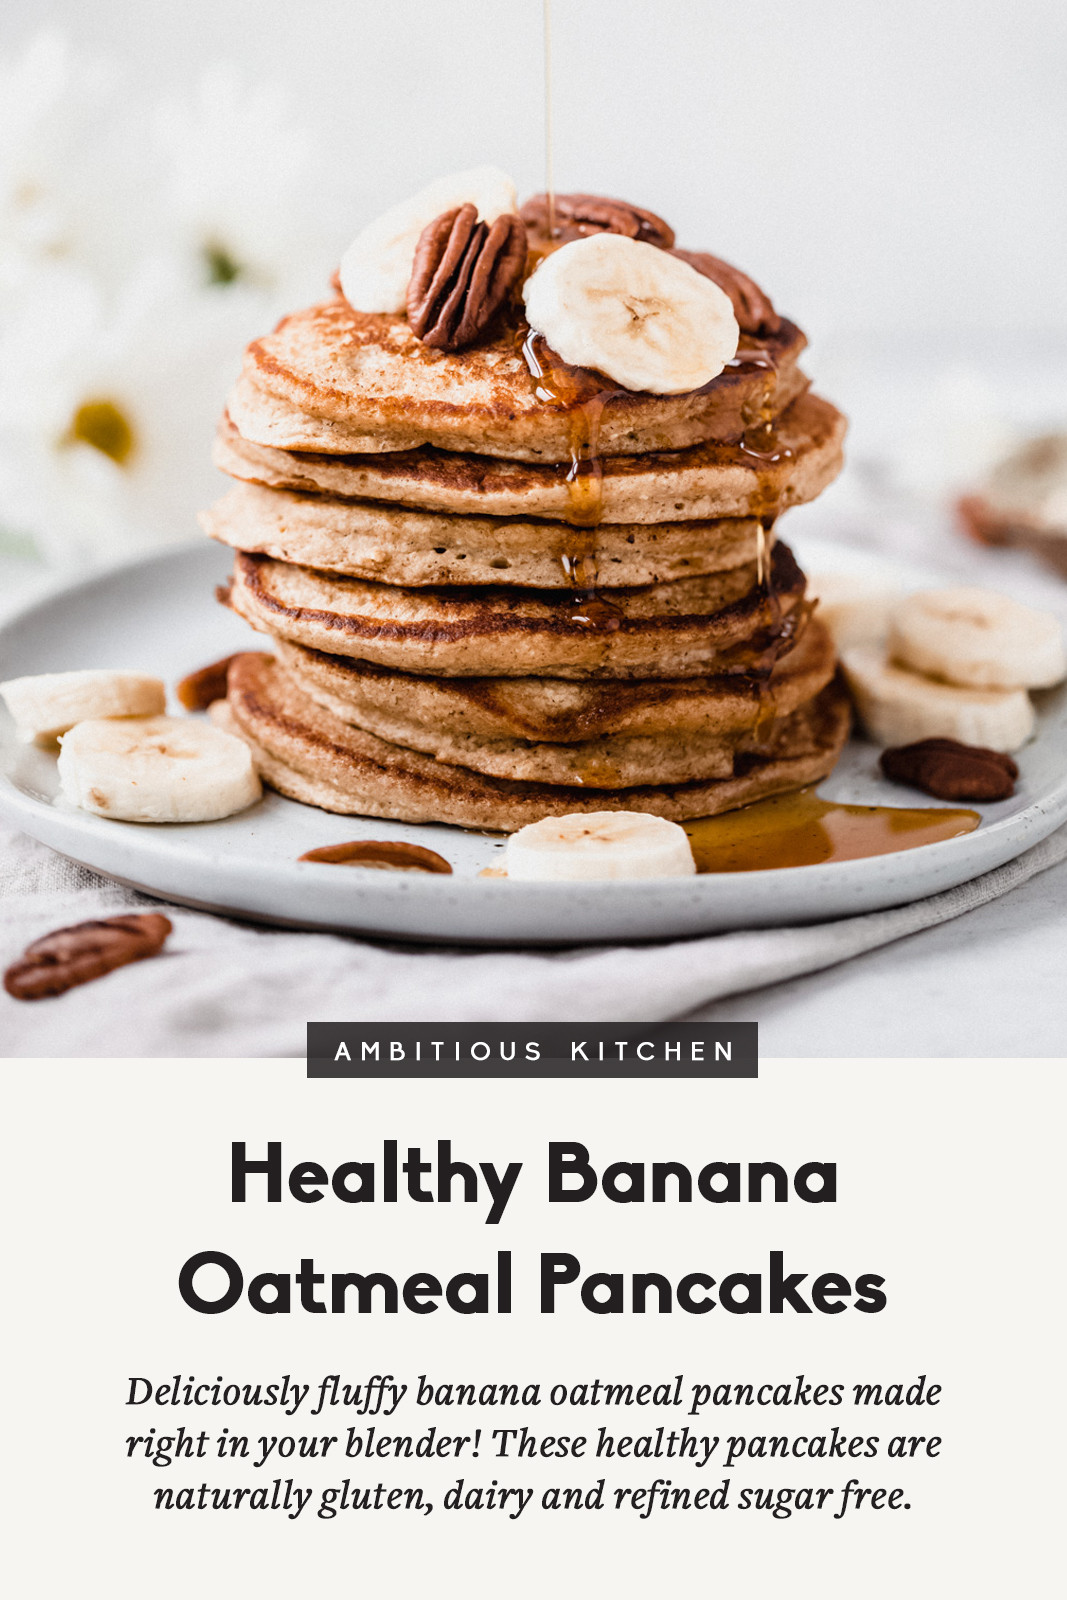 Oatmeal Pancakes Healthy
 Healthy Banana Oatmeal Pancakes made right in the blender